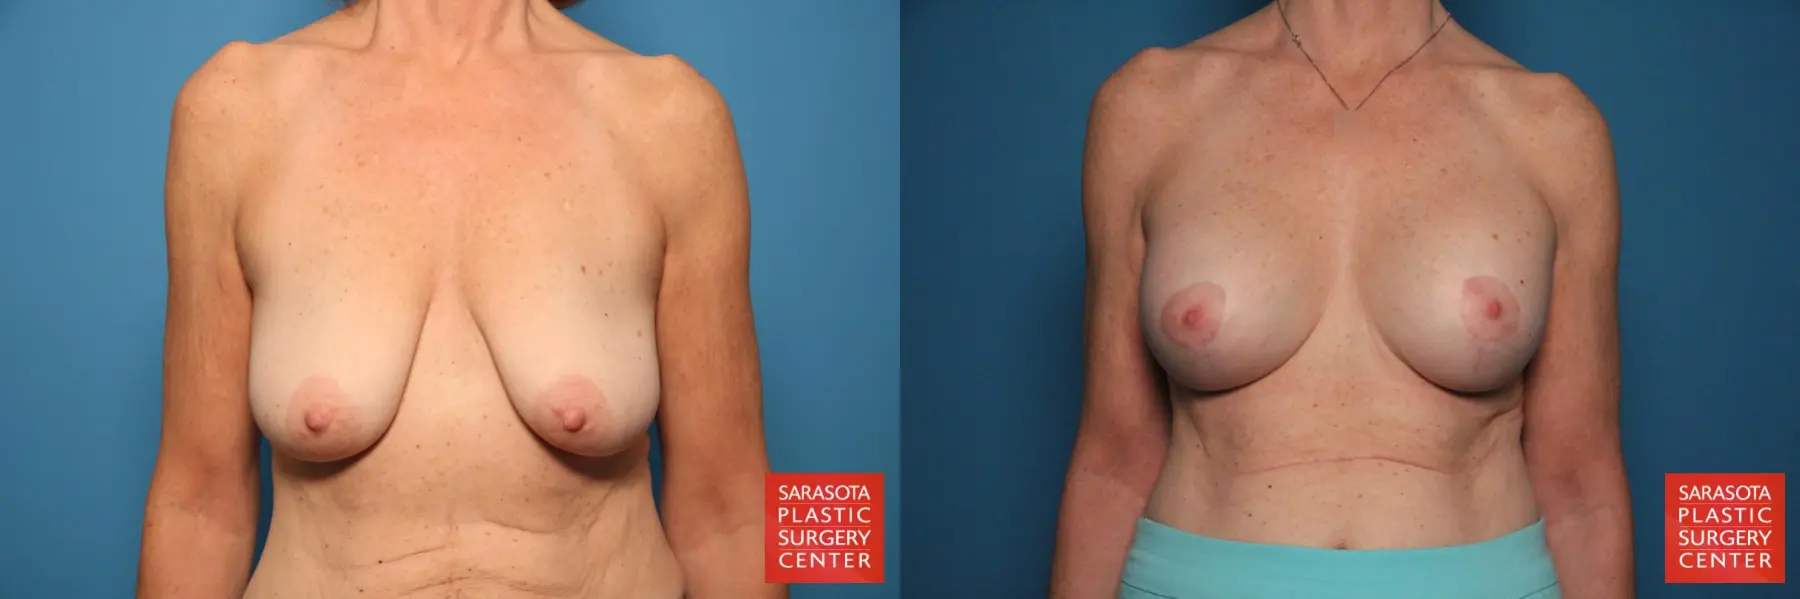 Breast Augmentation With Mesh : Patient 1 - Before and After 1